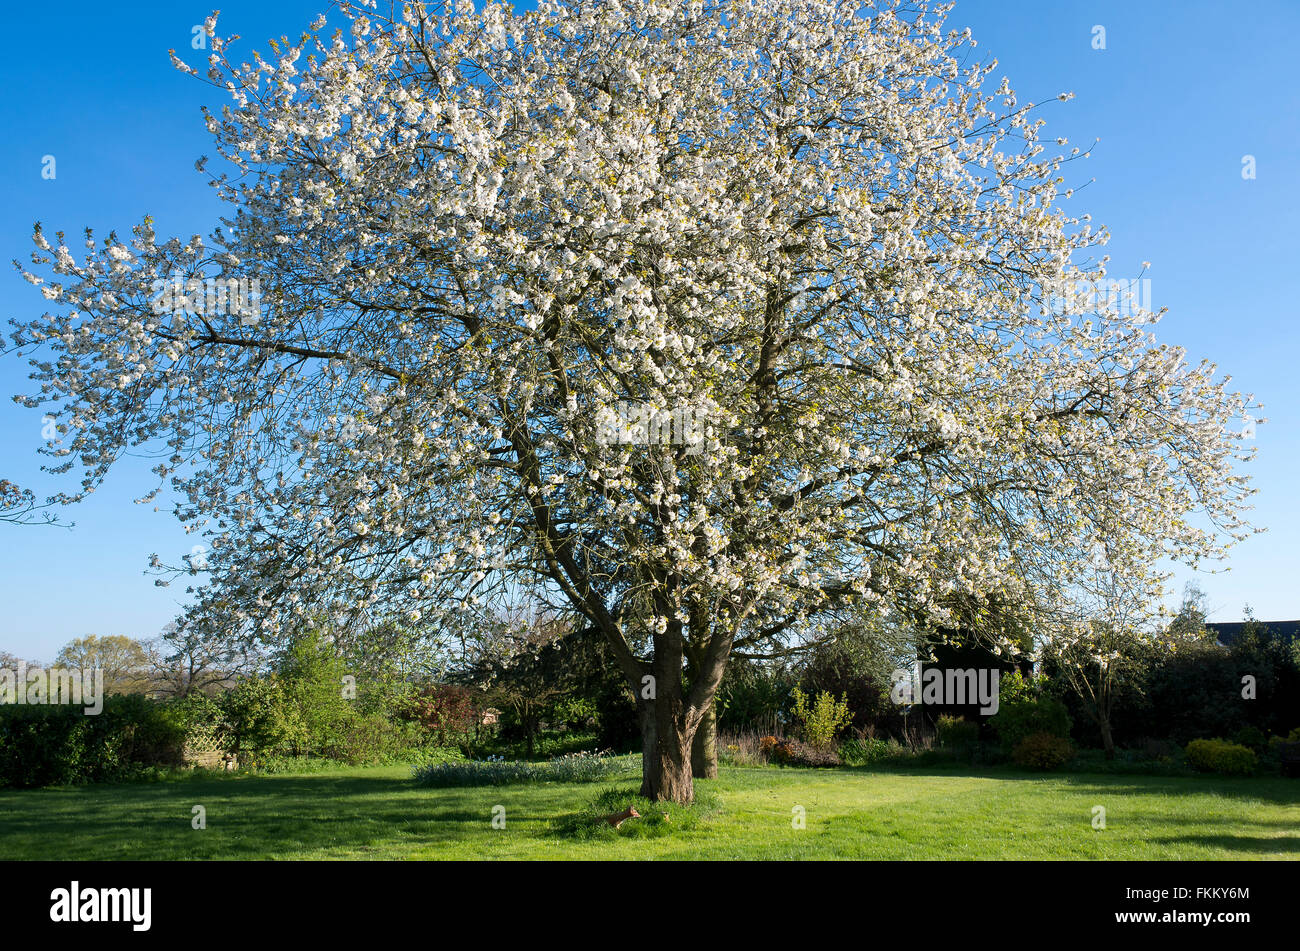 Wild cherry tree in full blossom  in Spring in an English garden Stock Photo